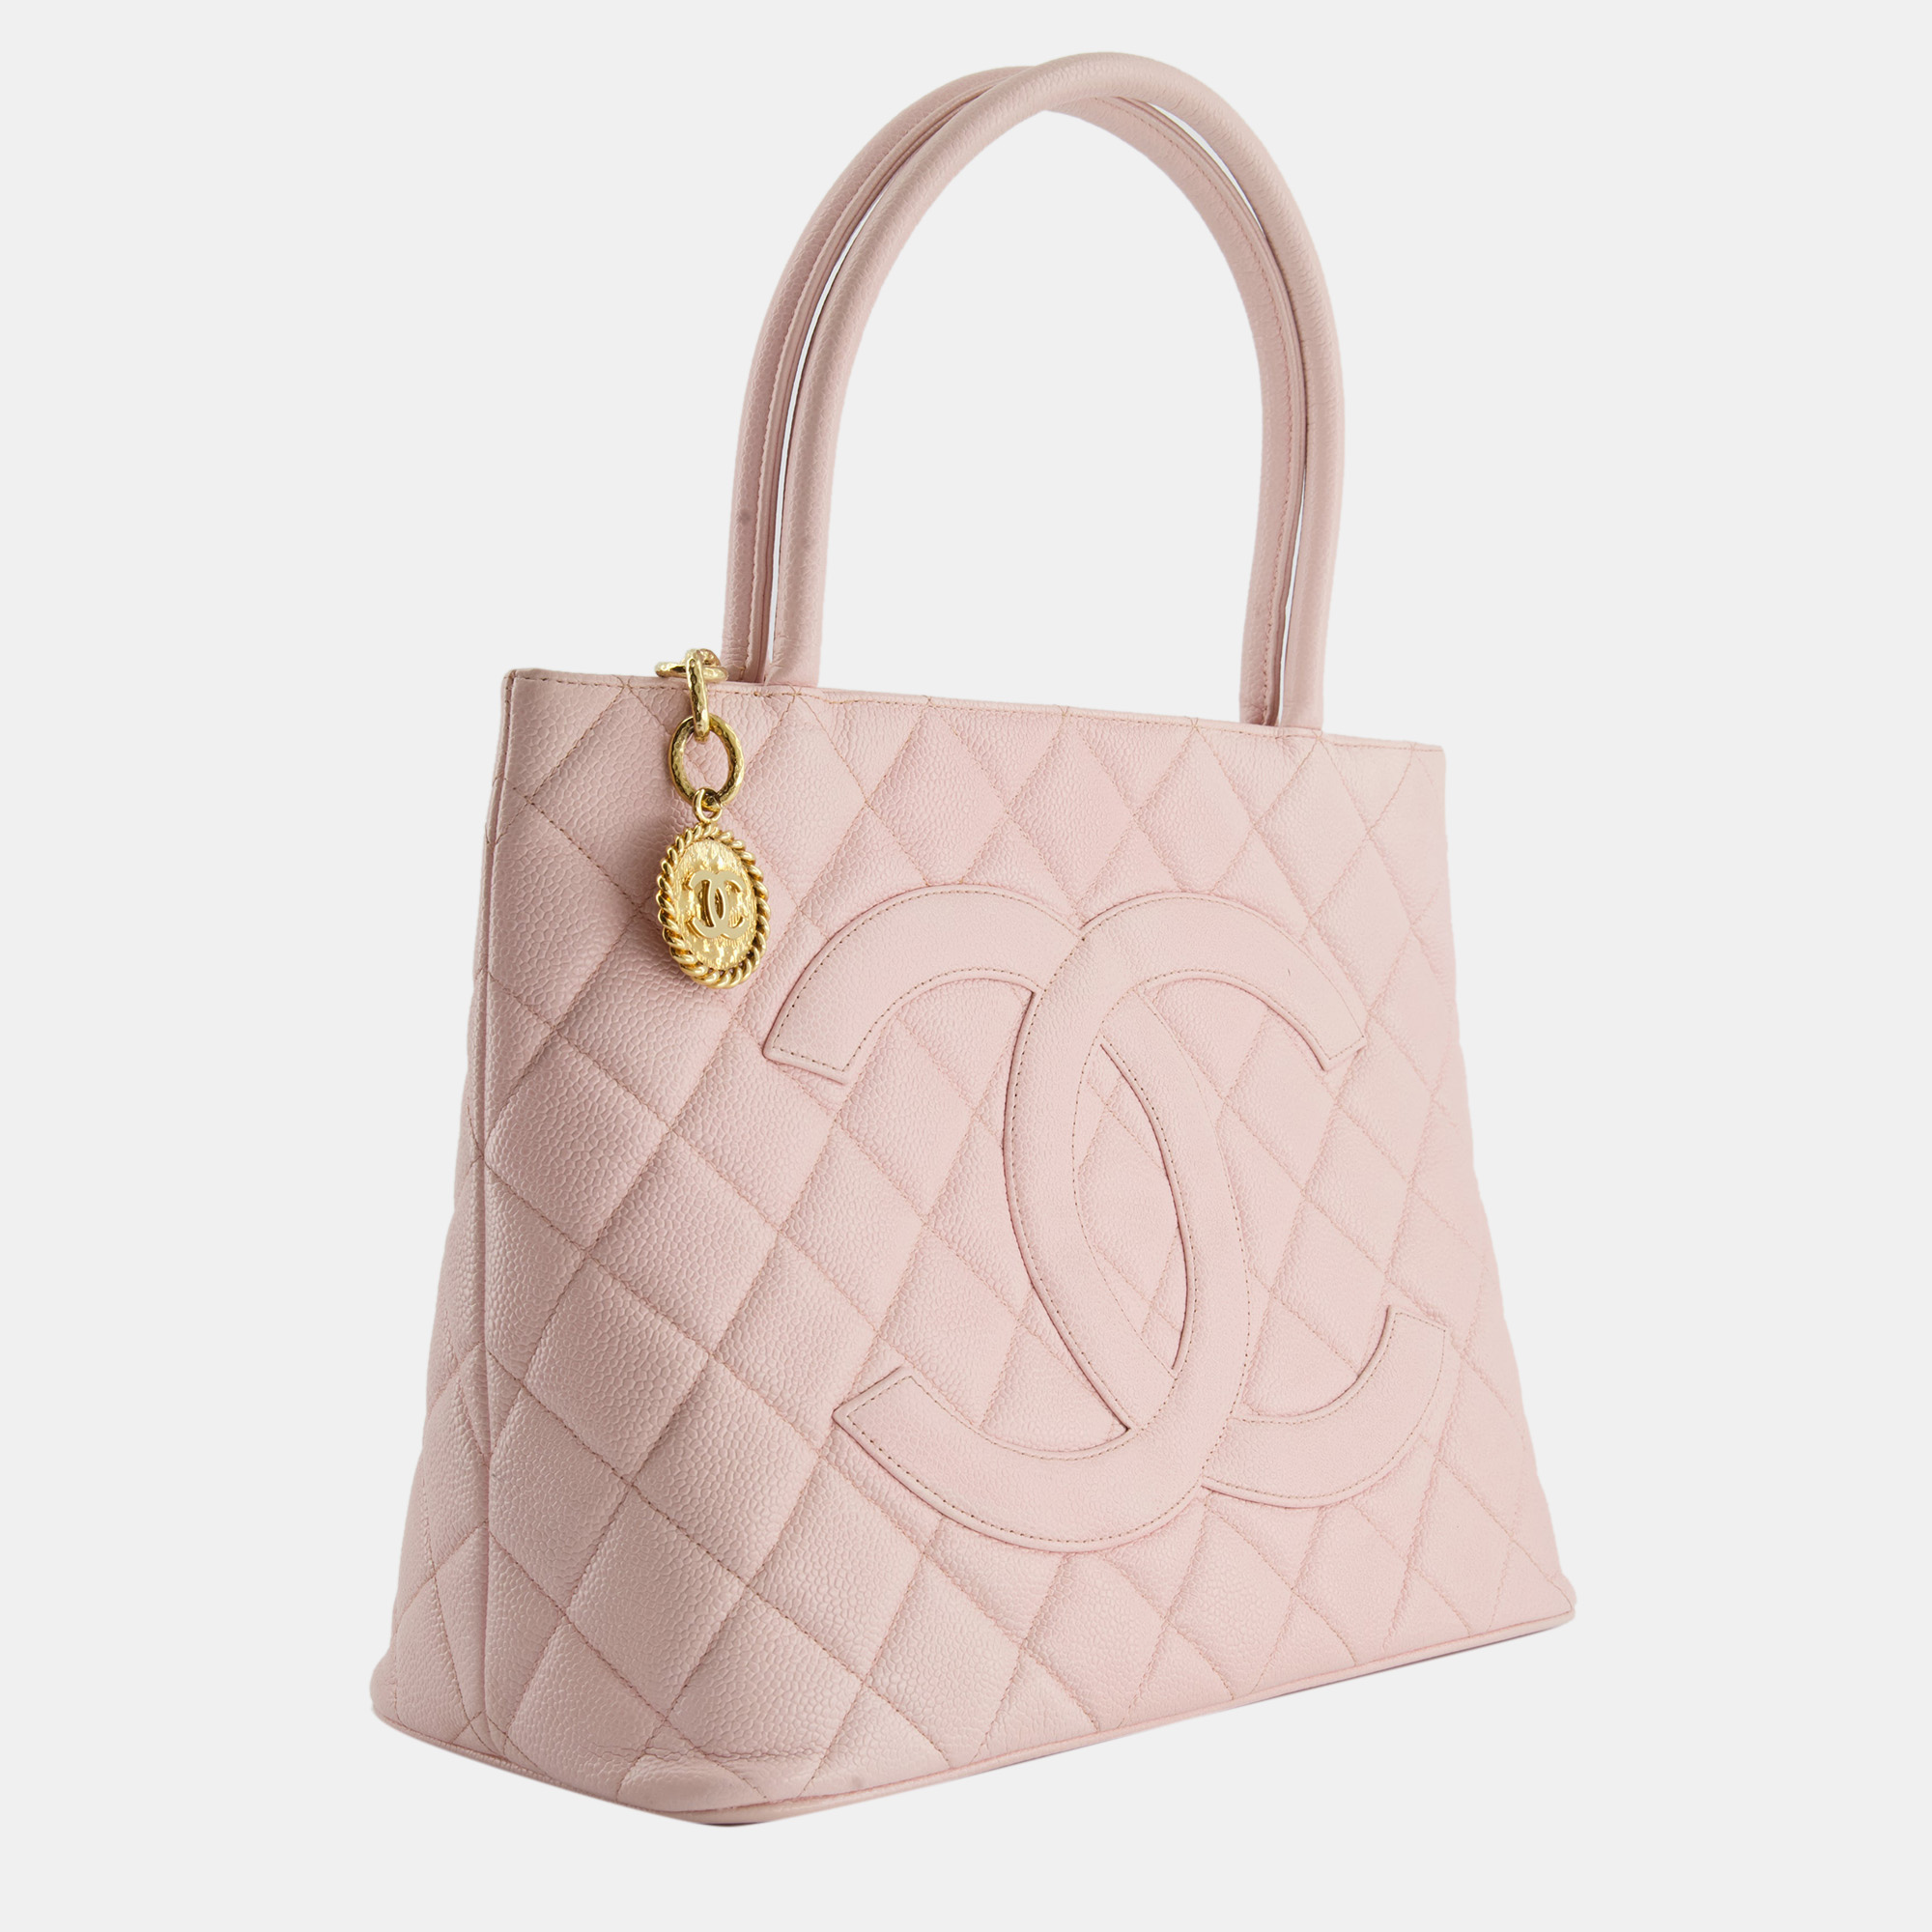 

Chanel Vintage Baby Pink Tote Bag with CC Logo Caviar Leather and 24K Gold Hardware